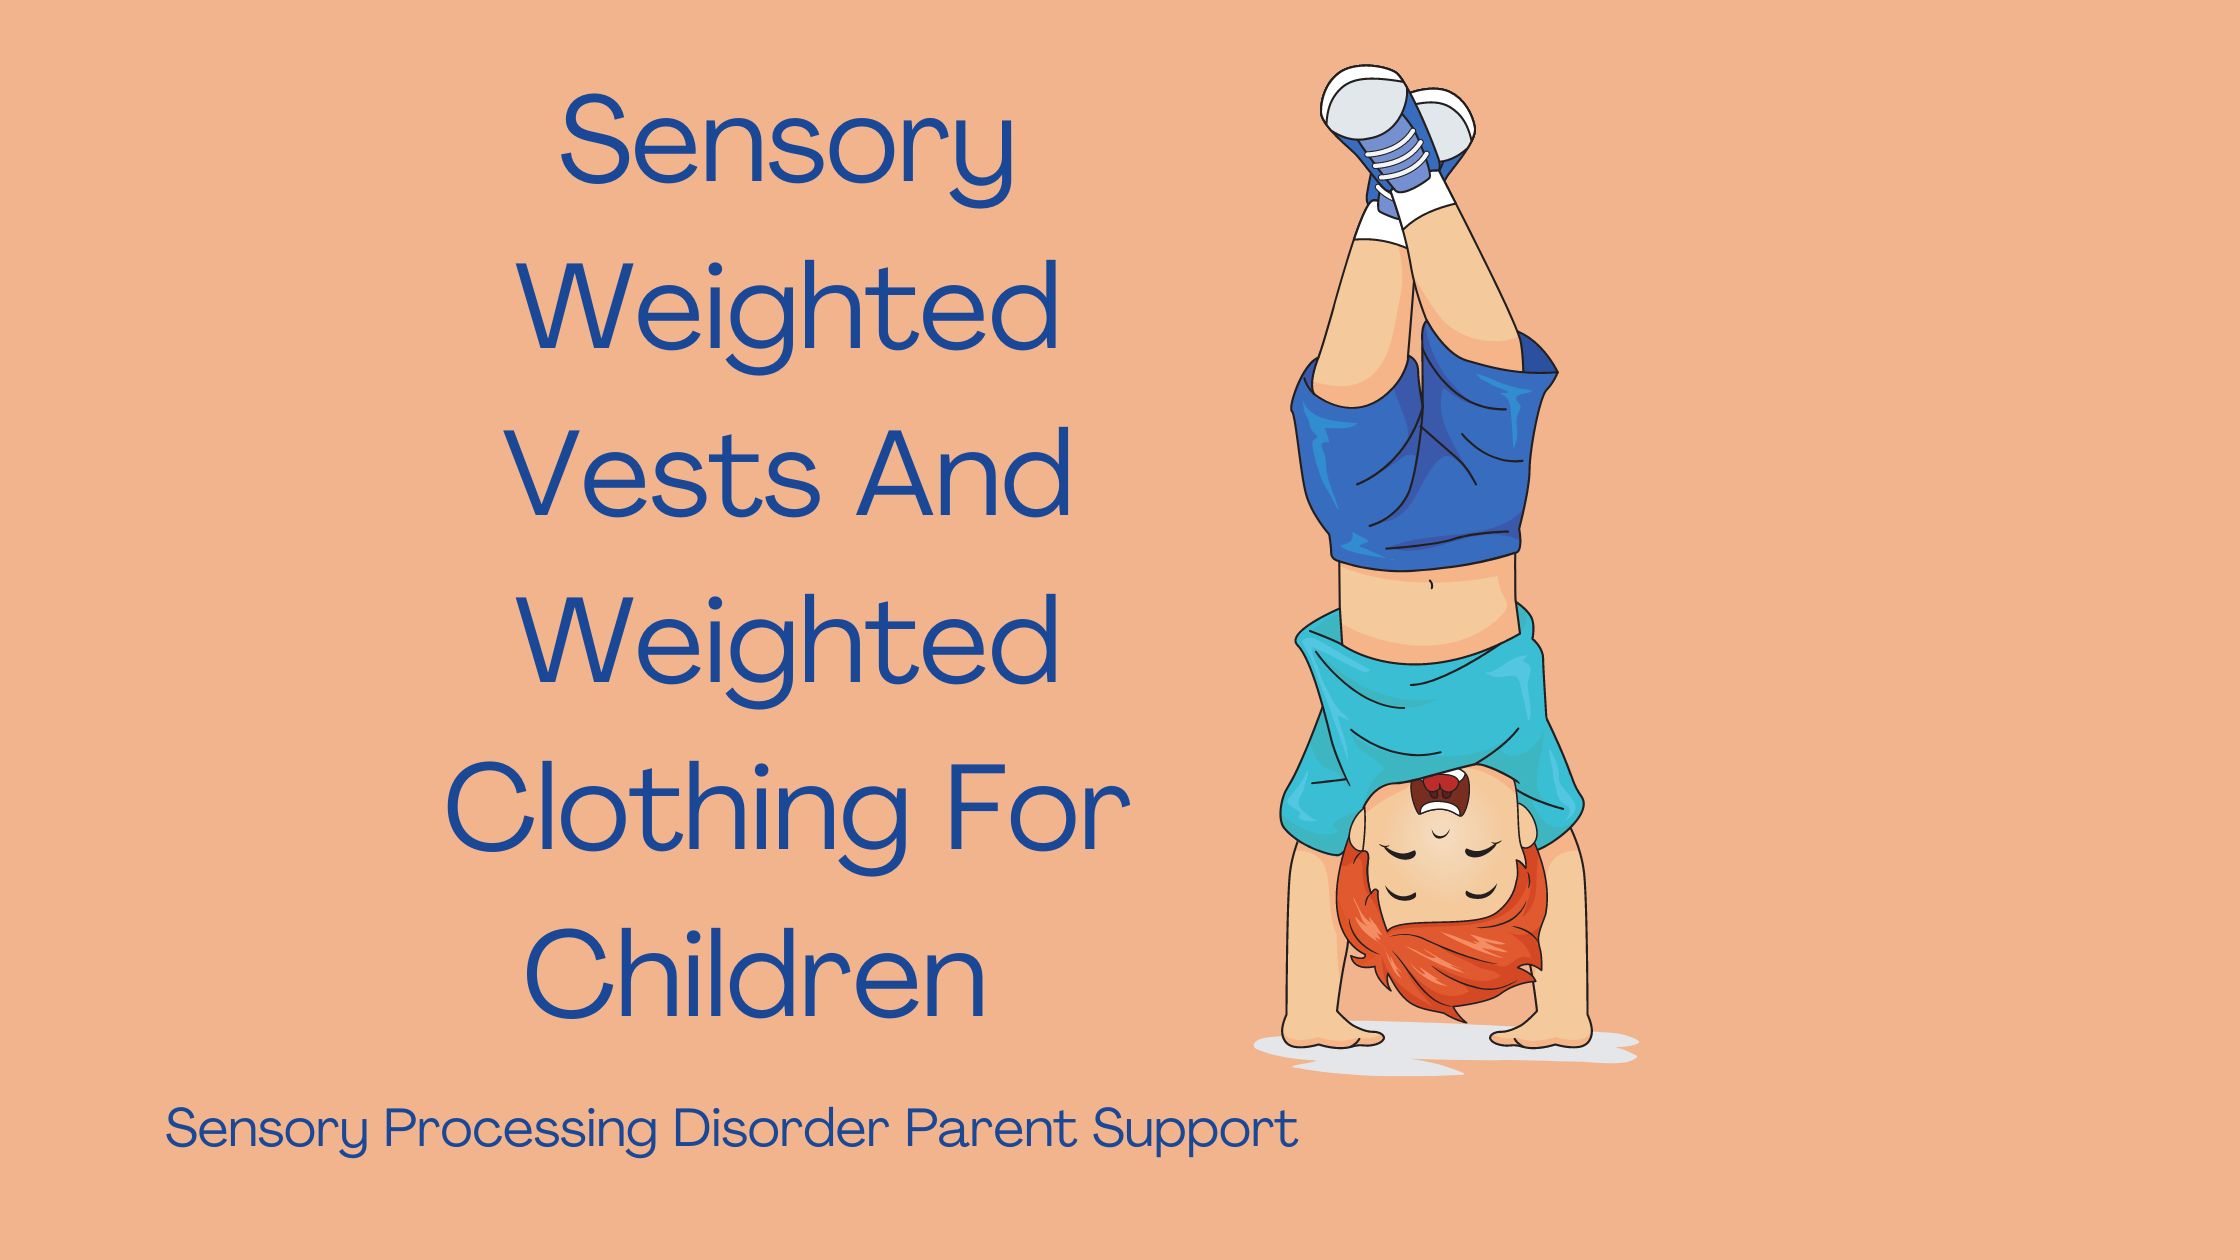 boy with sensory processing disorder doing a handstand Sensory Weighted Vests And Weighted Clothing For Children